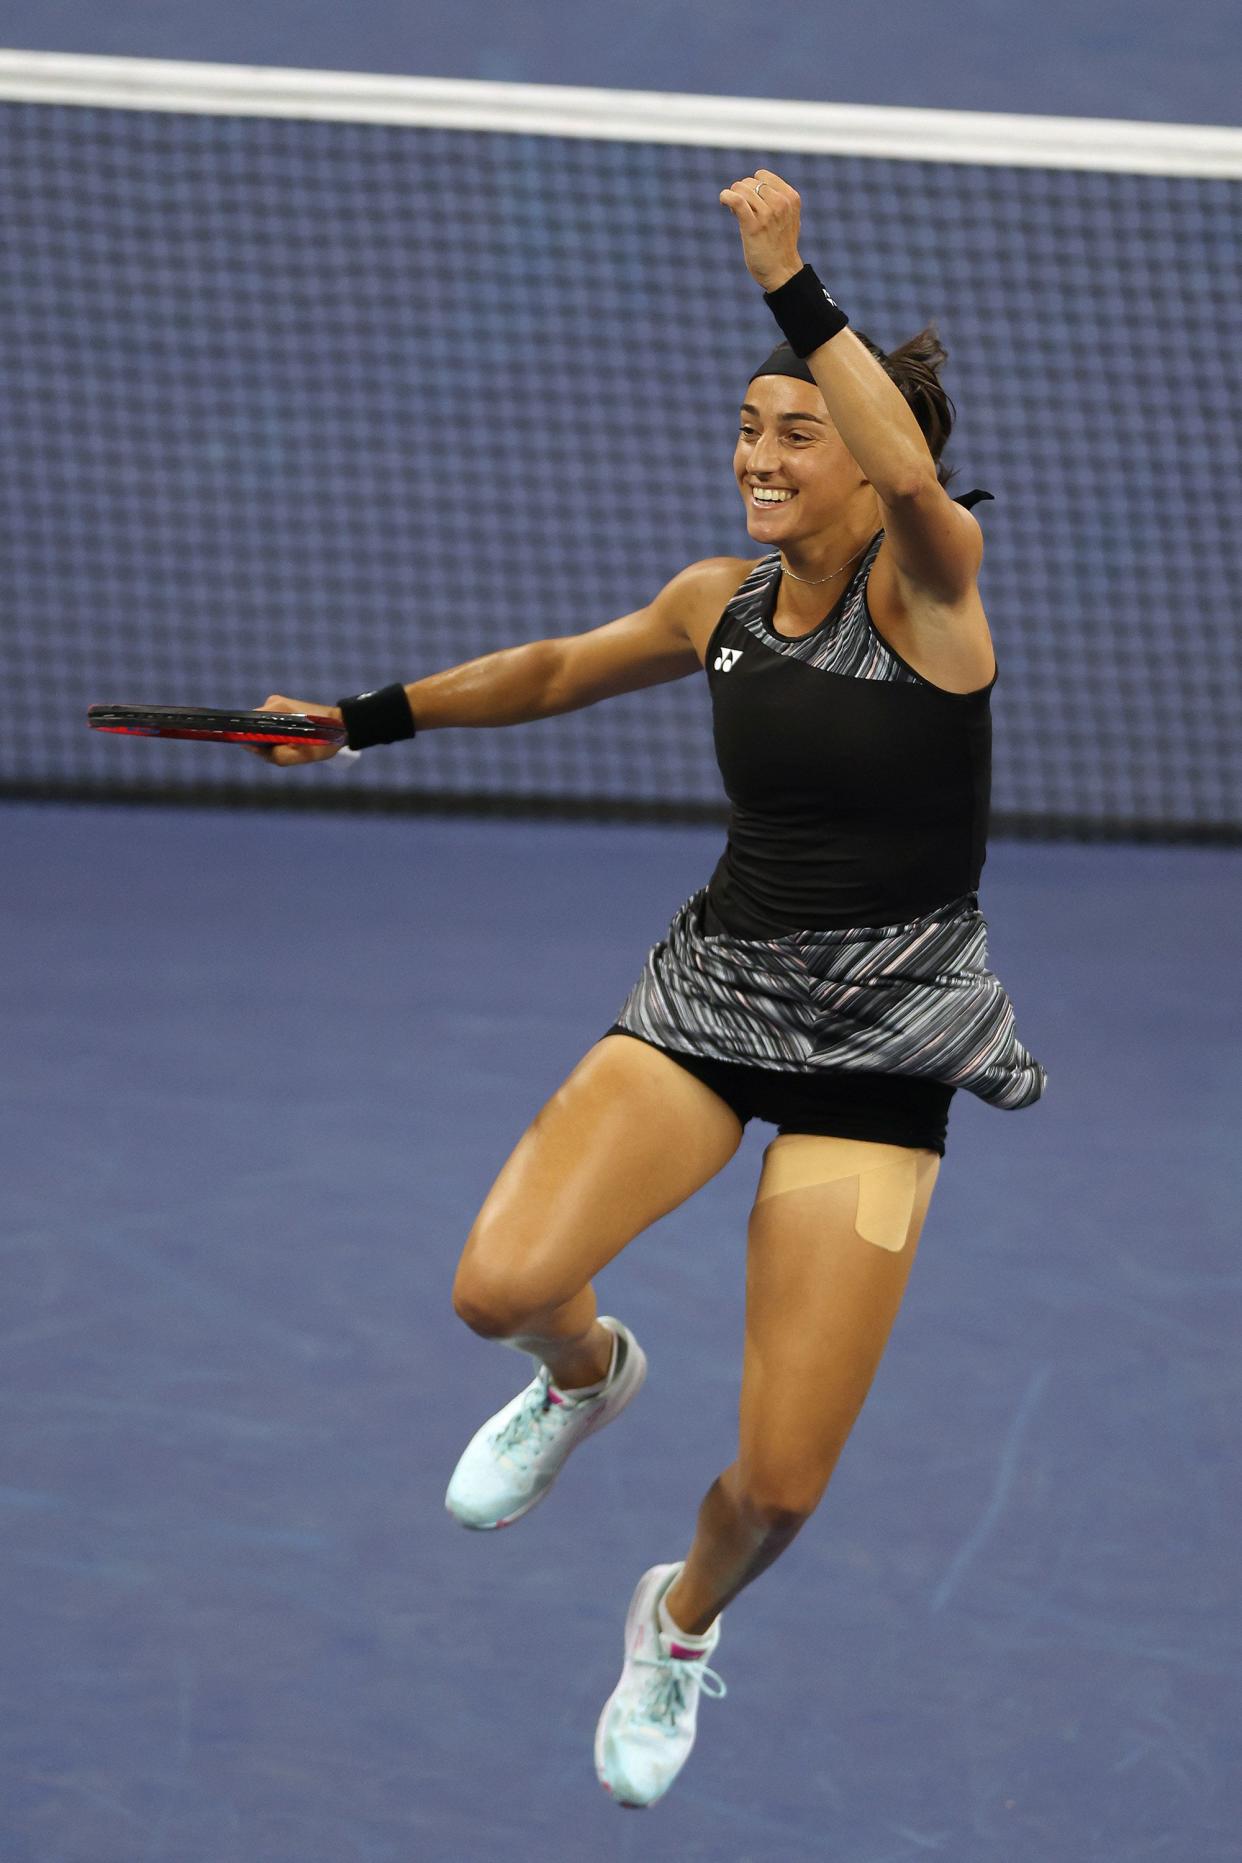 Caroline Garcia of France celebrates after defeating Bianca Andreescu of Canada during their Women's Singles Third Round match on Day 5 of the 2022 U.S. Open at USTA Billie Jean King National Tennis Center on Sept. 02, 2022, in Flushing, Queens.